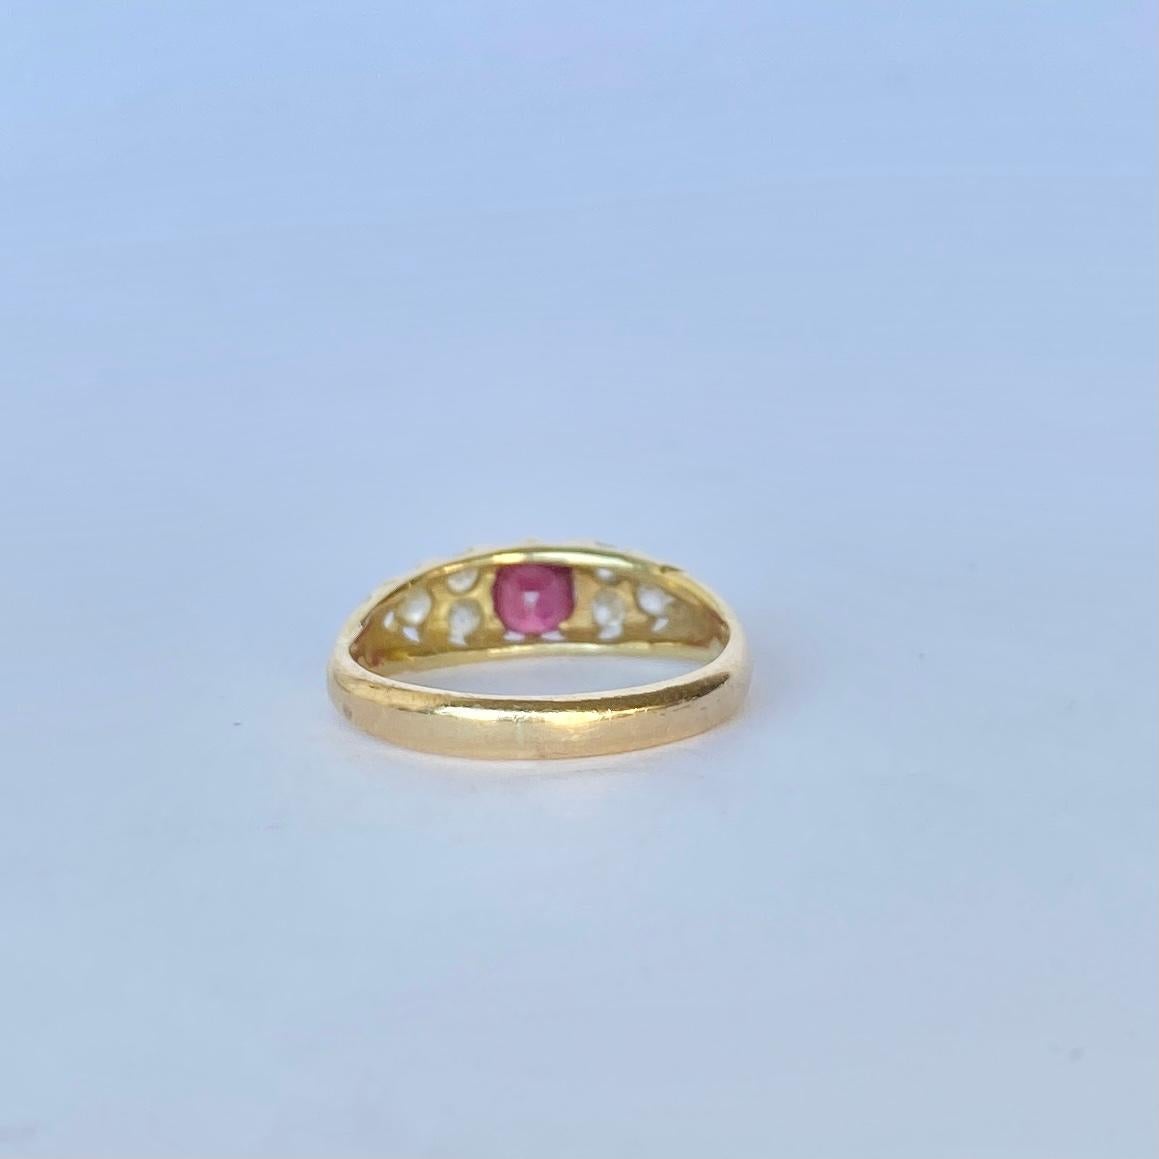 This stunning band holds a cherry red ruby at the centre measuring 45pts and a trio of diamonds either side. The diamonds total 30pts. The ring is modelled in 18carat gold and has decorative cut out shoulders. 

Ring Size: L 1/2 or 6 
Band Width: